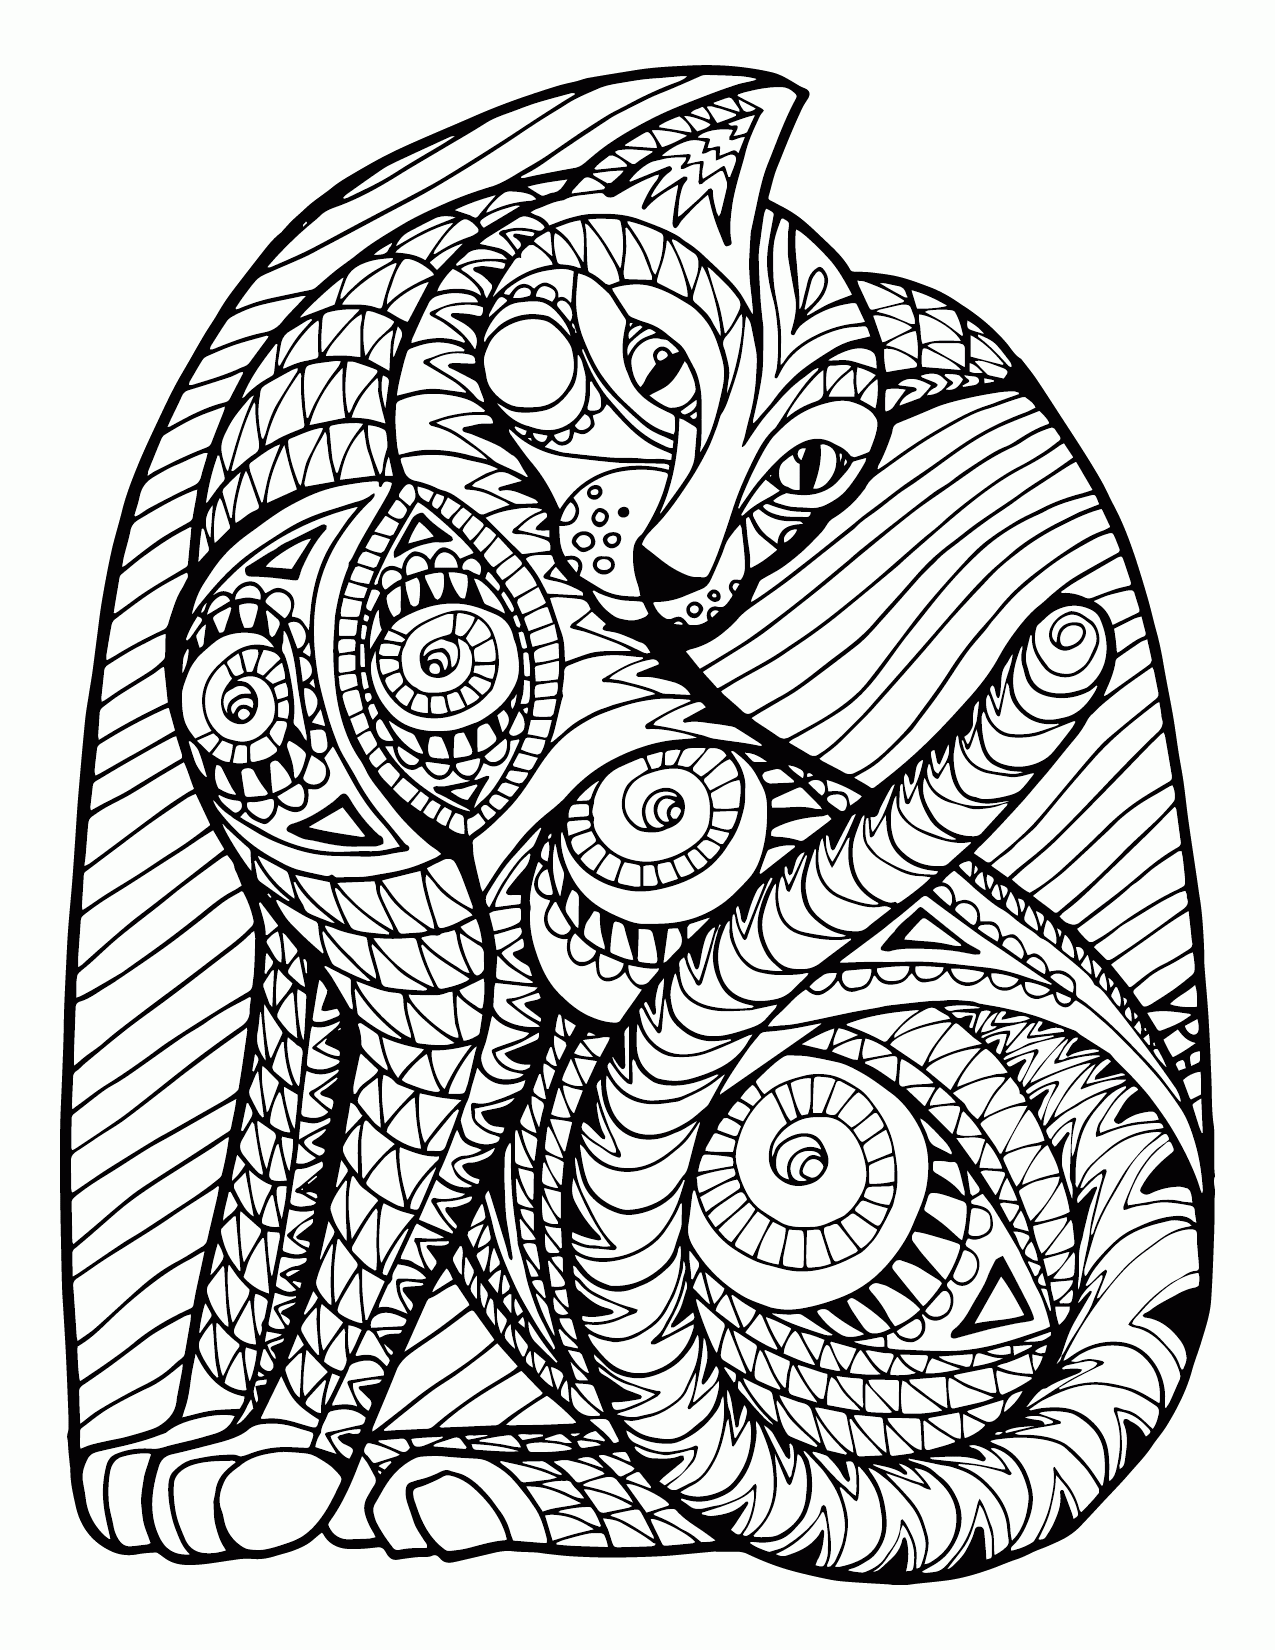 Download Adult Coloring Pages Paisley - Coloring Home